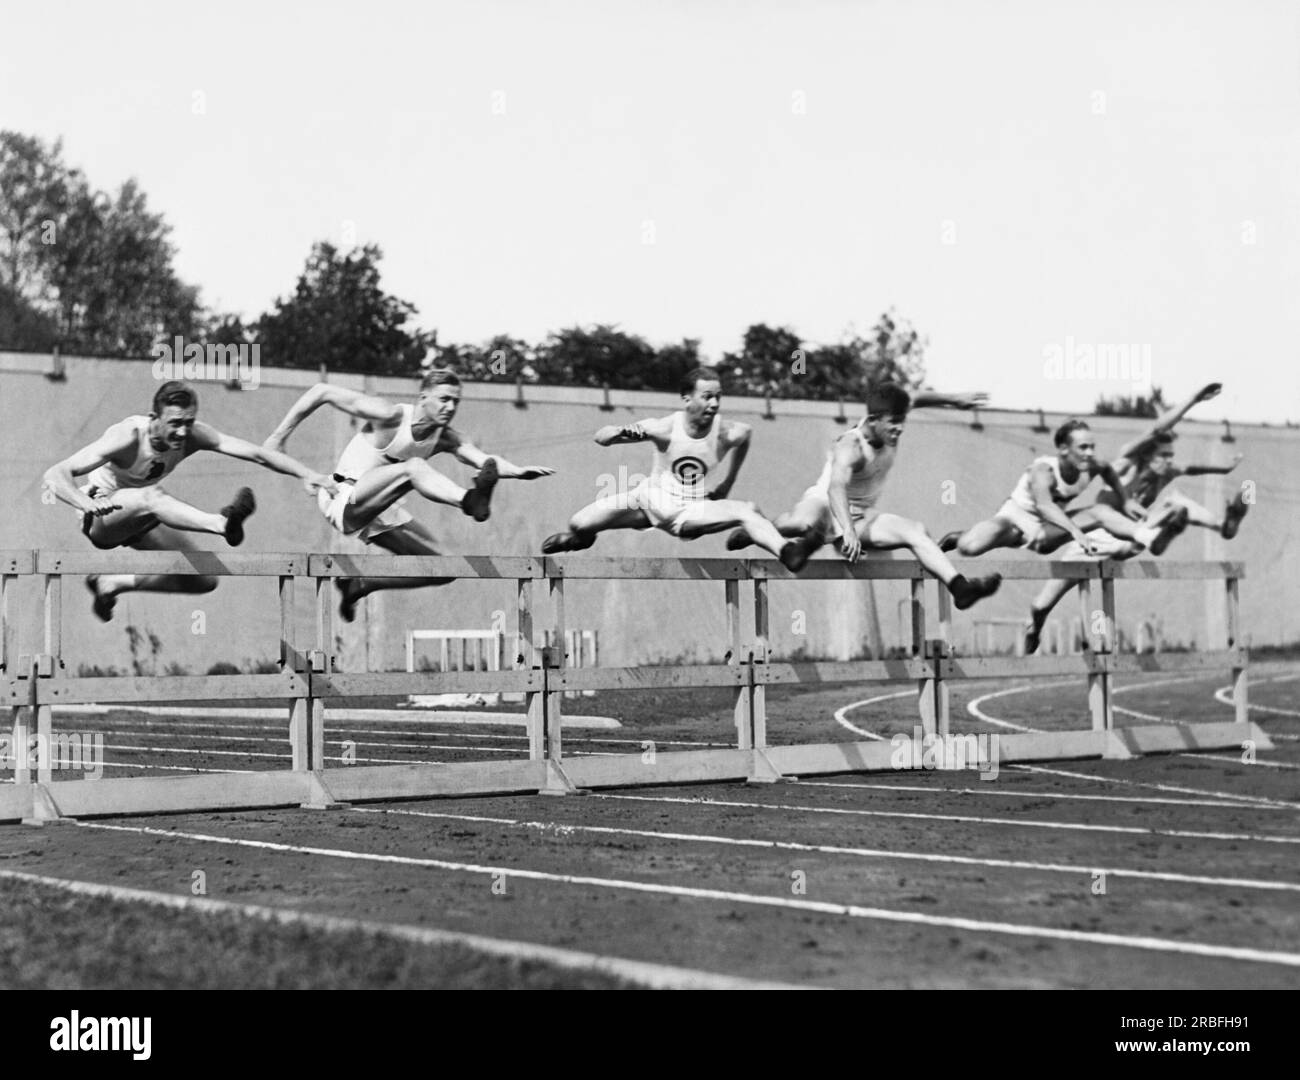 Chicago, Illinois:  August 31, 1923 The 120 yard high hurdles event at the National AAU meet at Stagg Field. Stock Photo